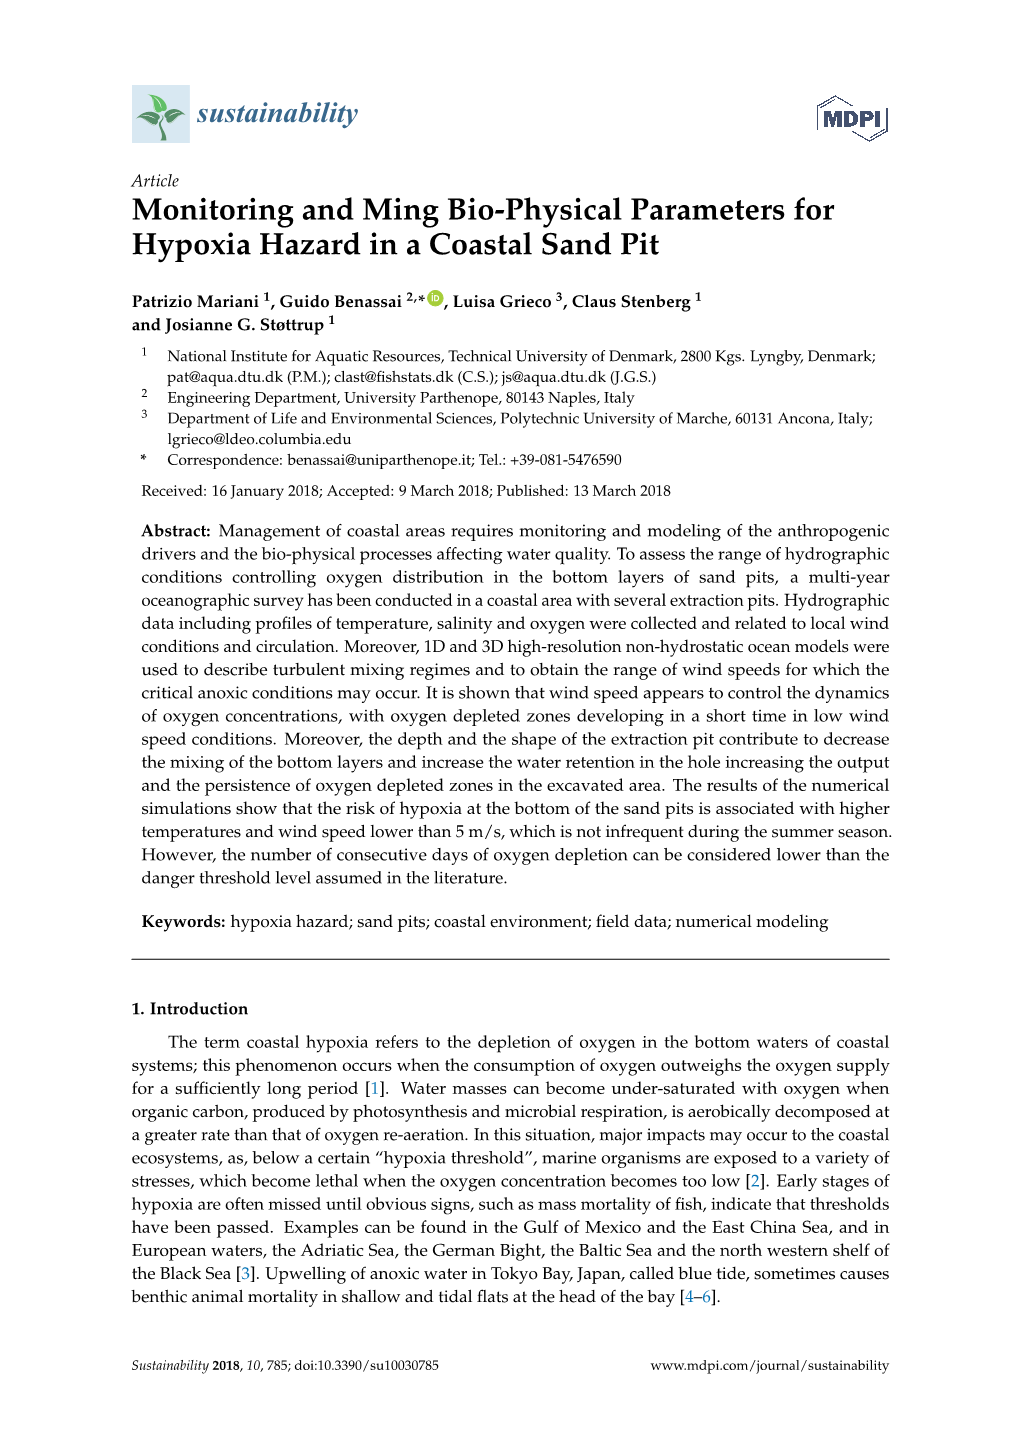 Monitoring and Ming Bio-Physical Parameters for Hypoxia Hazard in a Coastal Sand Pit